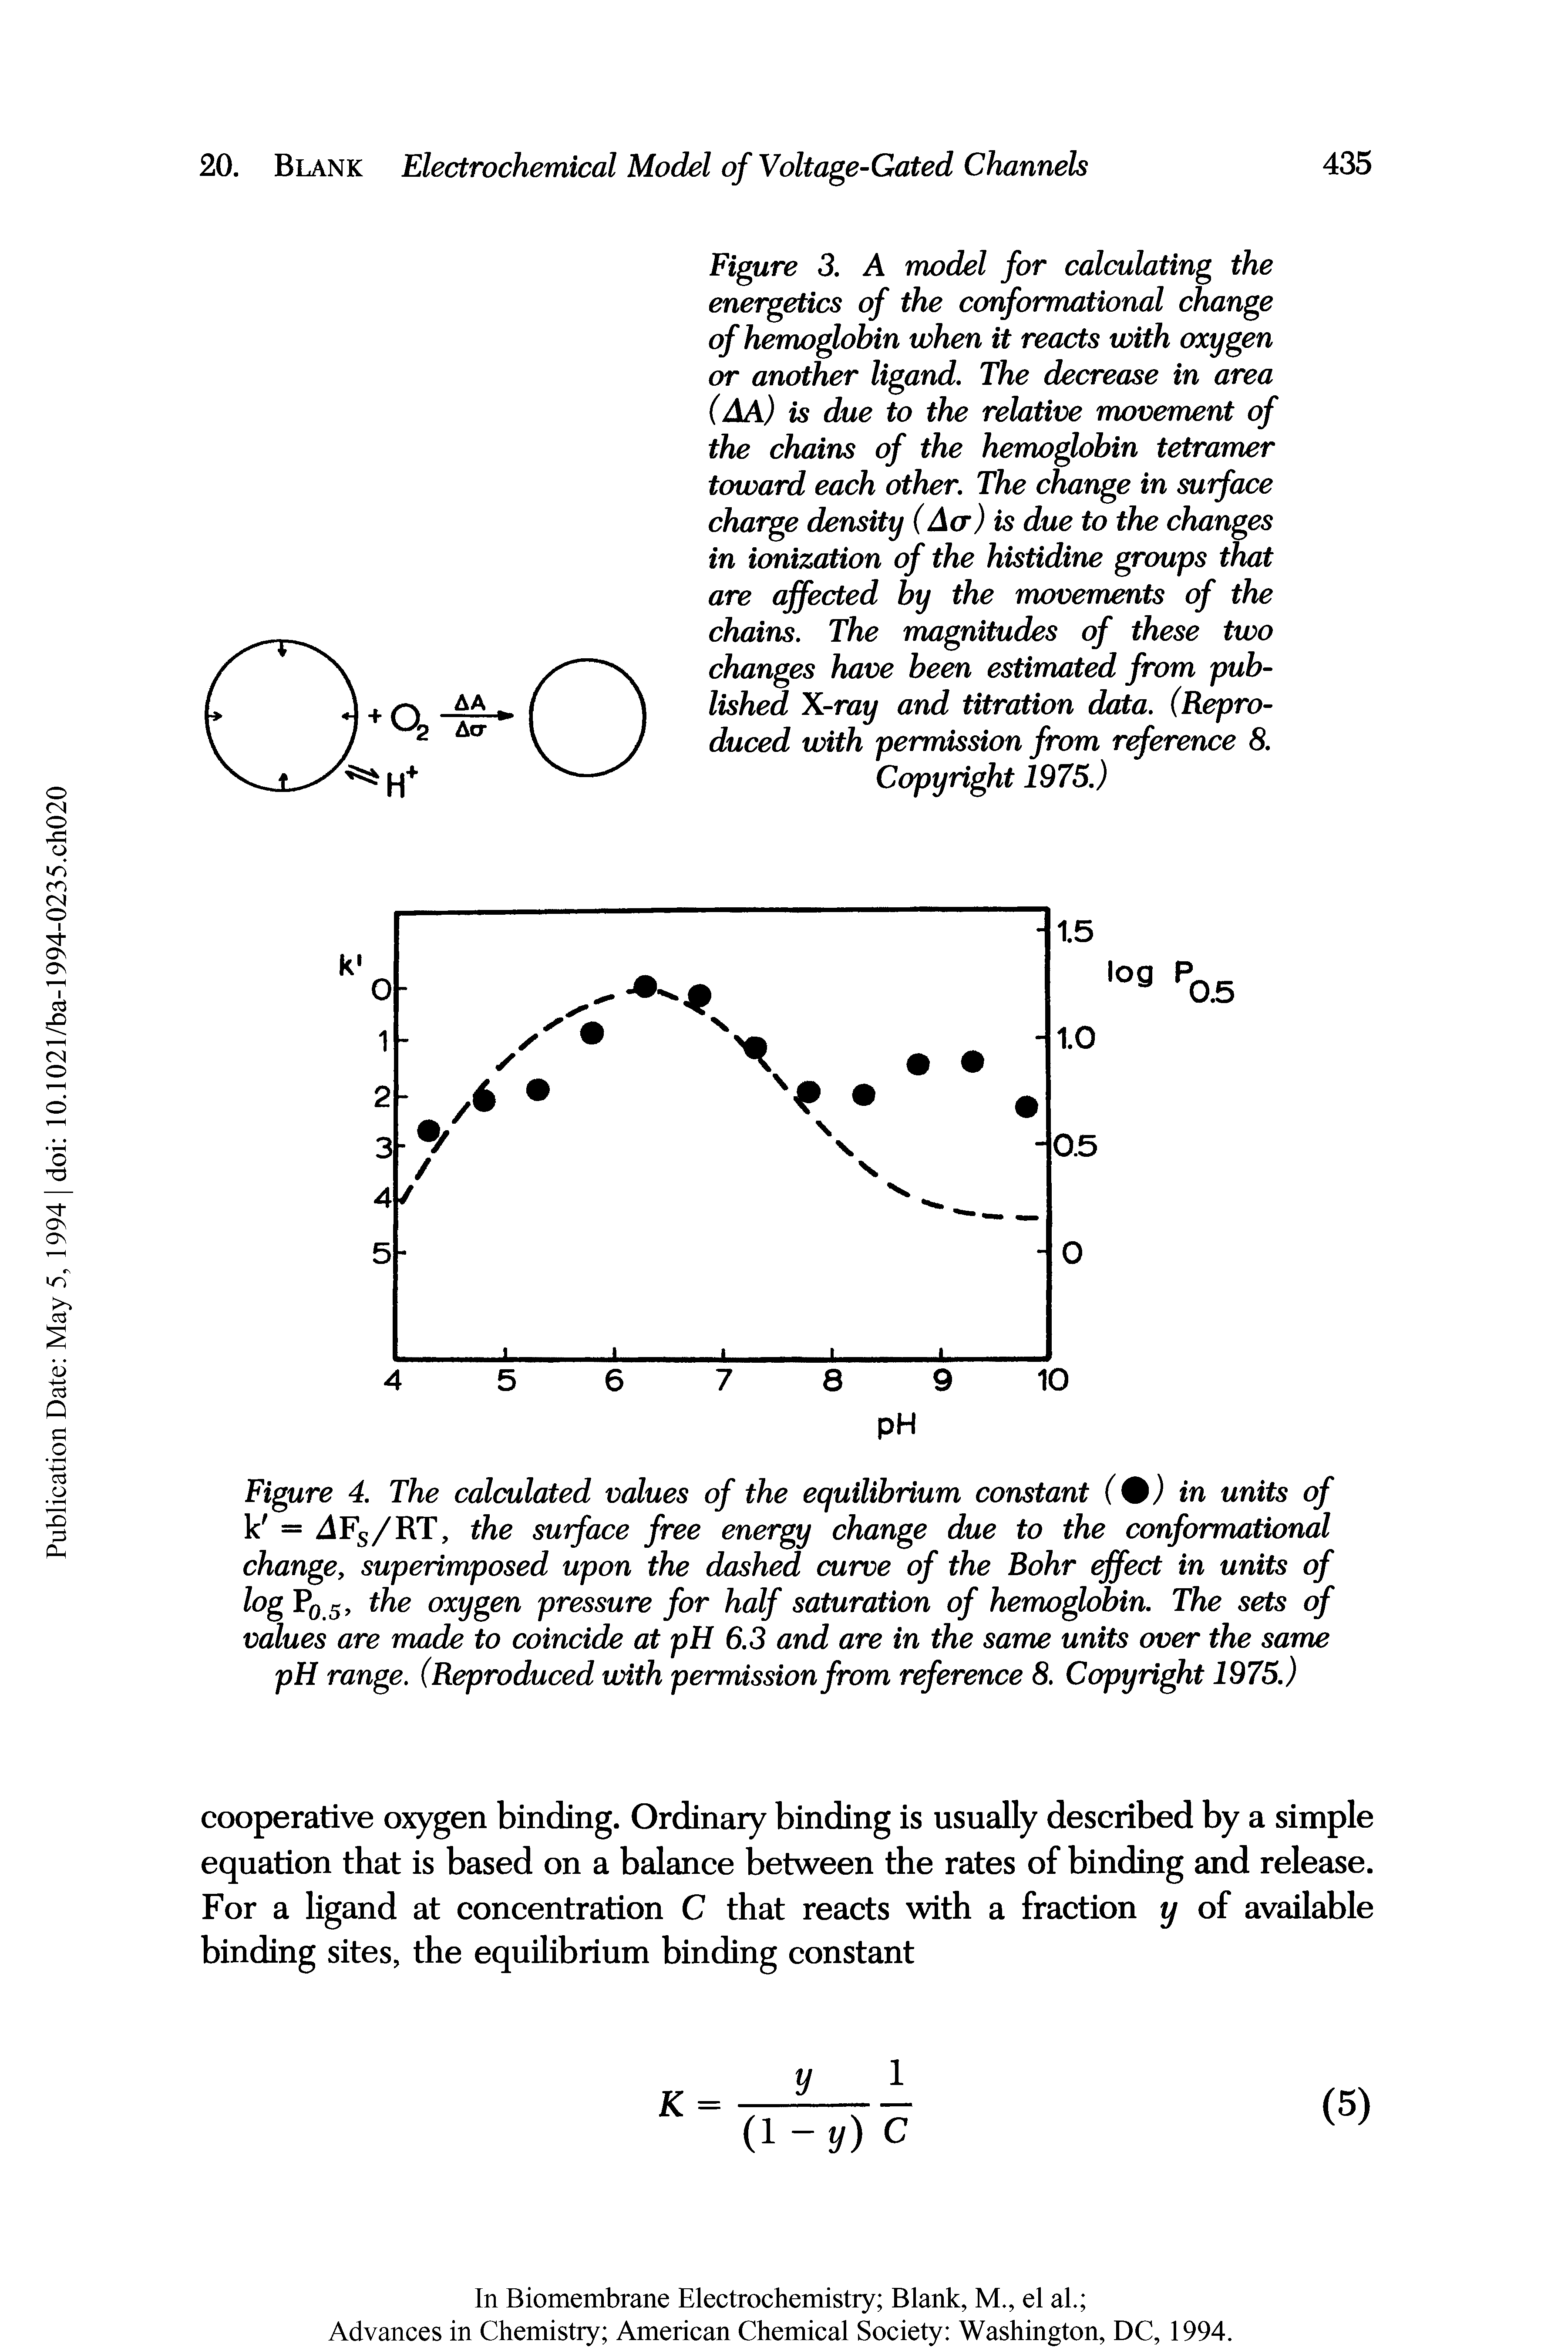 Figure 4. The calculated values of the equilibrium constant (%) in units of k = zlFs/RT, the surface free energy change due to the conformational change, superimposed upon the dashed curve of the Bohr effect in units of log P0 5, the oxygen pressure for half saturation of hemoglobin. The sets of values are made to coincide at pH 6.3 and are in the same units over the same pH range. (Reproduced with permission from reference 8. Copyright 1975.)...